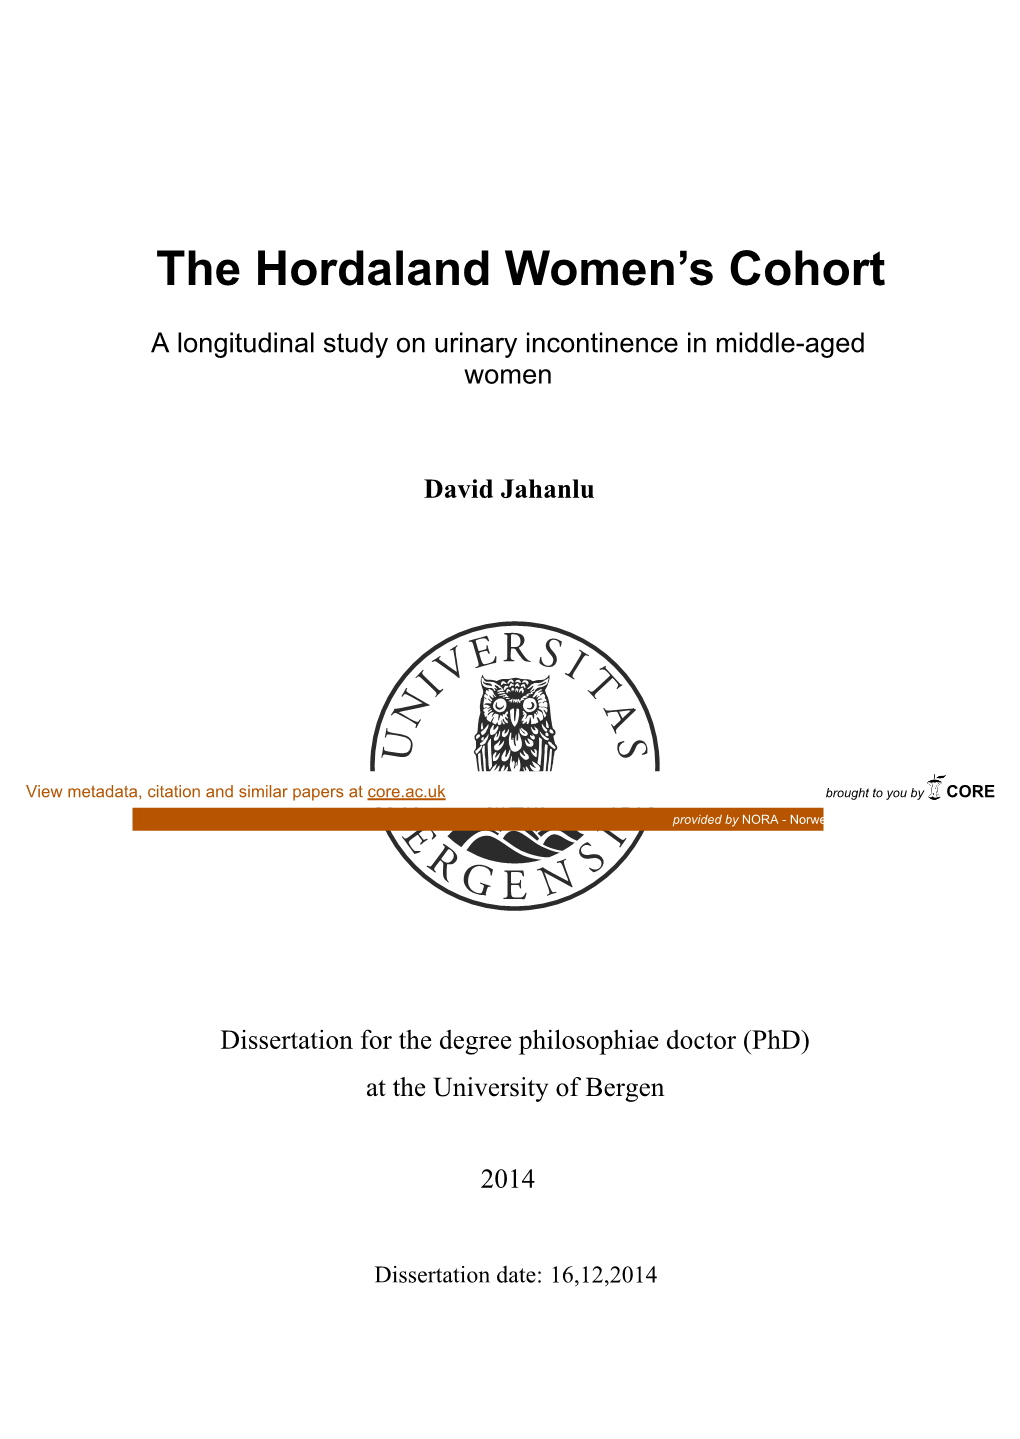 The Hordaland Women's Cohort: a Prospective Cohort Study of Incontinence, Other Urinary Tract Symptoms and Related Health Issues in Middle-Aged Women